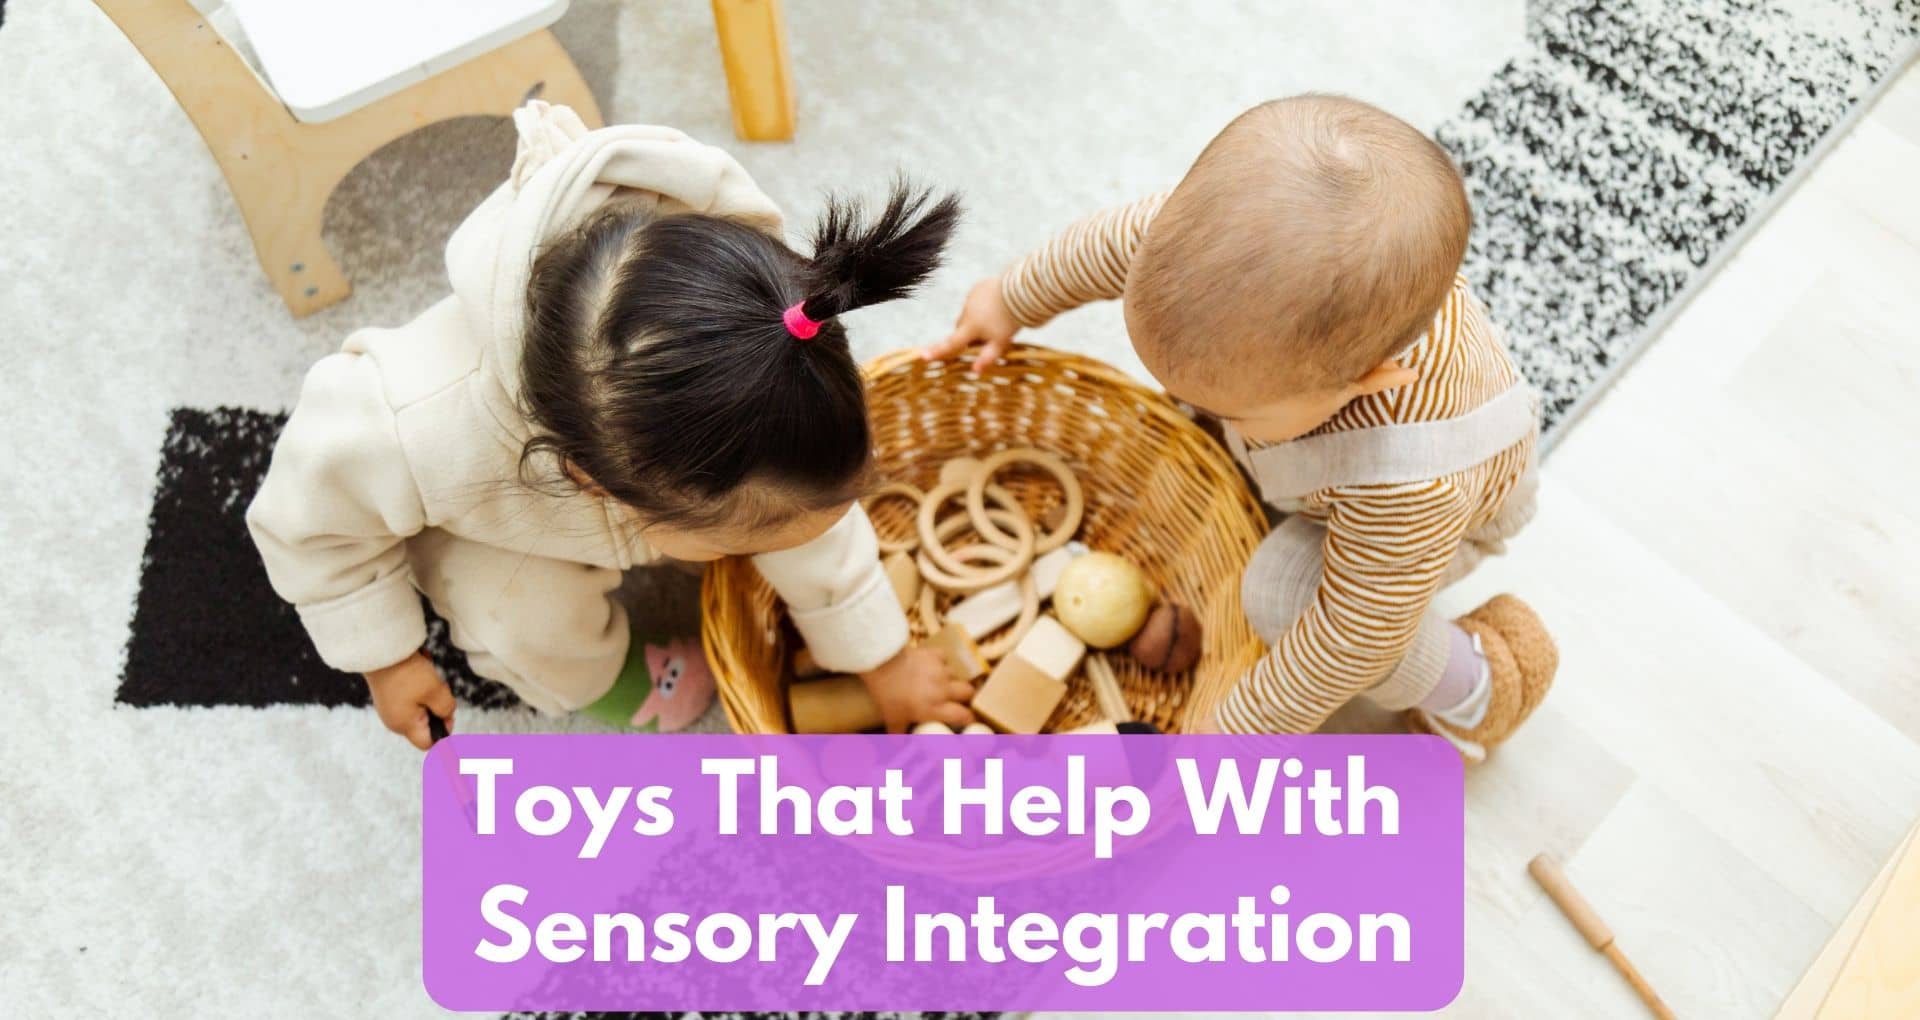 Are There Any Toys That Help With Sensory Integration?